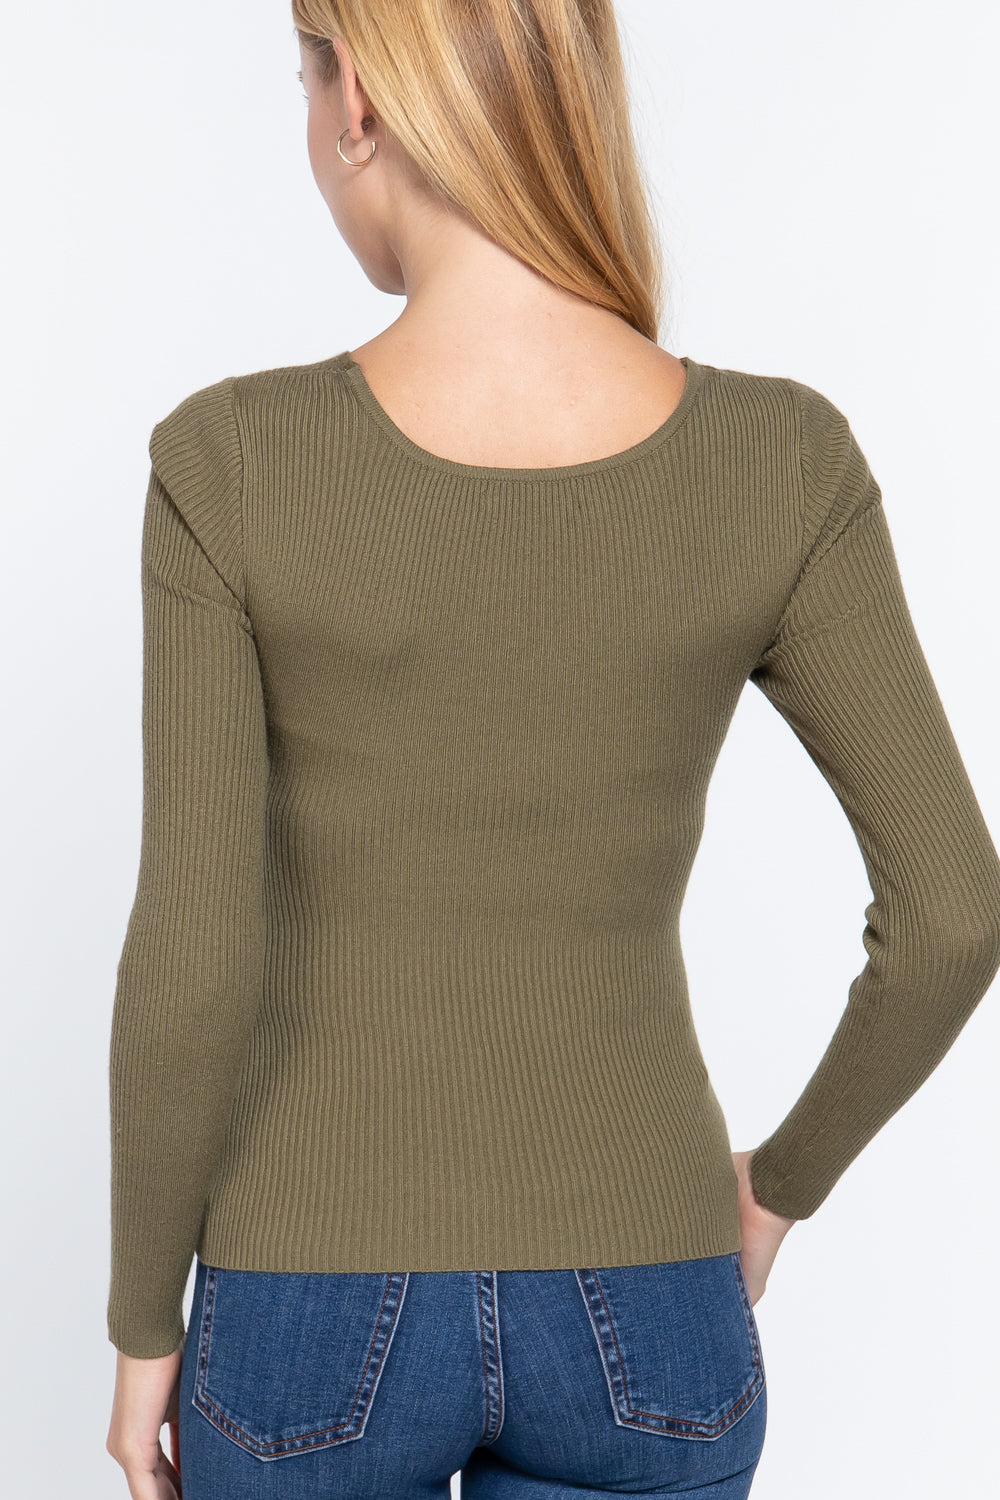 Long Slv V-neck Knotted Sweater - LOLA LUXE